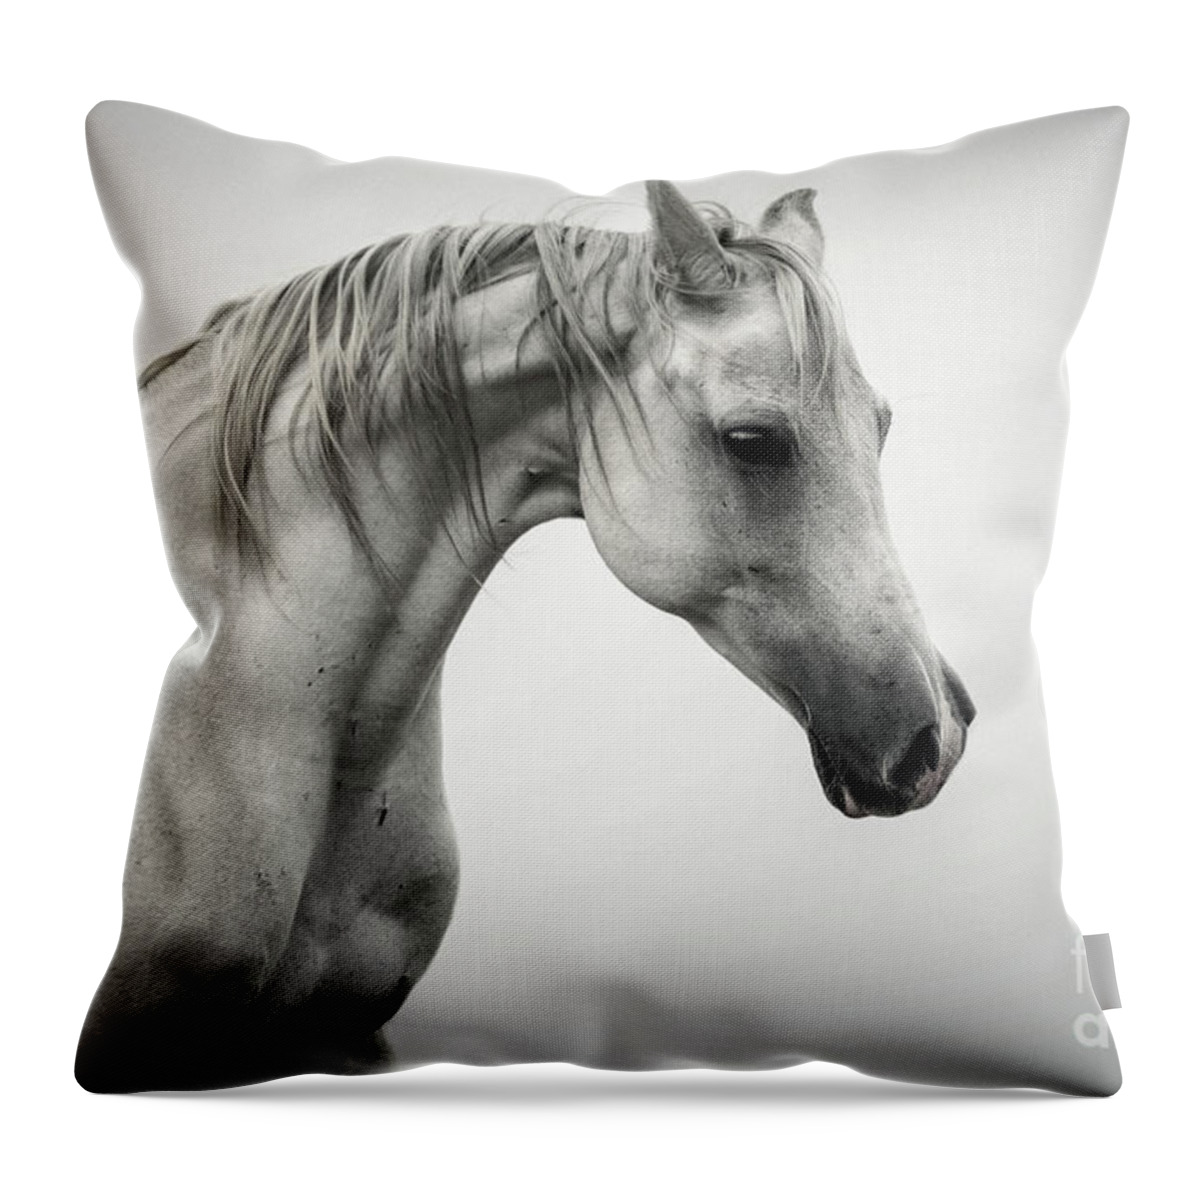 Horse Throw Pillow featuring the photograph White Horse Winter Mist Portrait by Dimitar Hristov